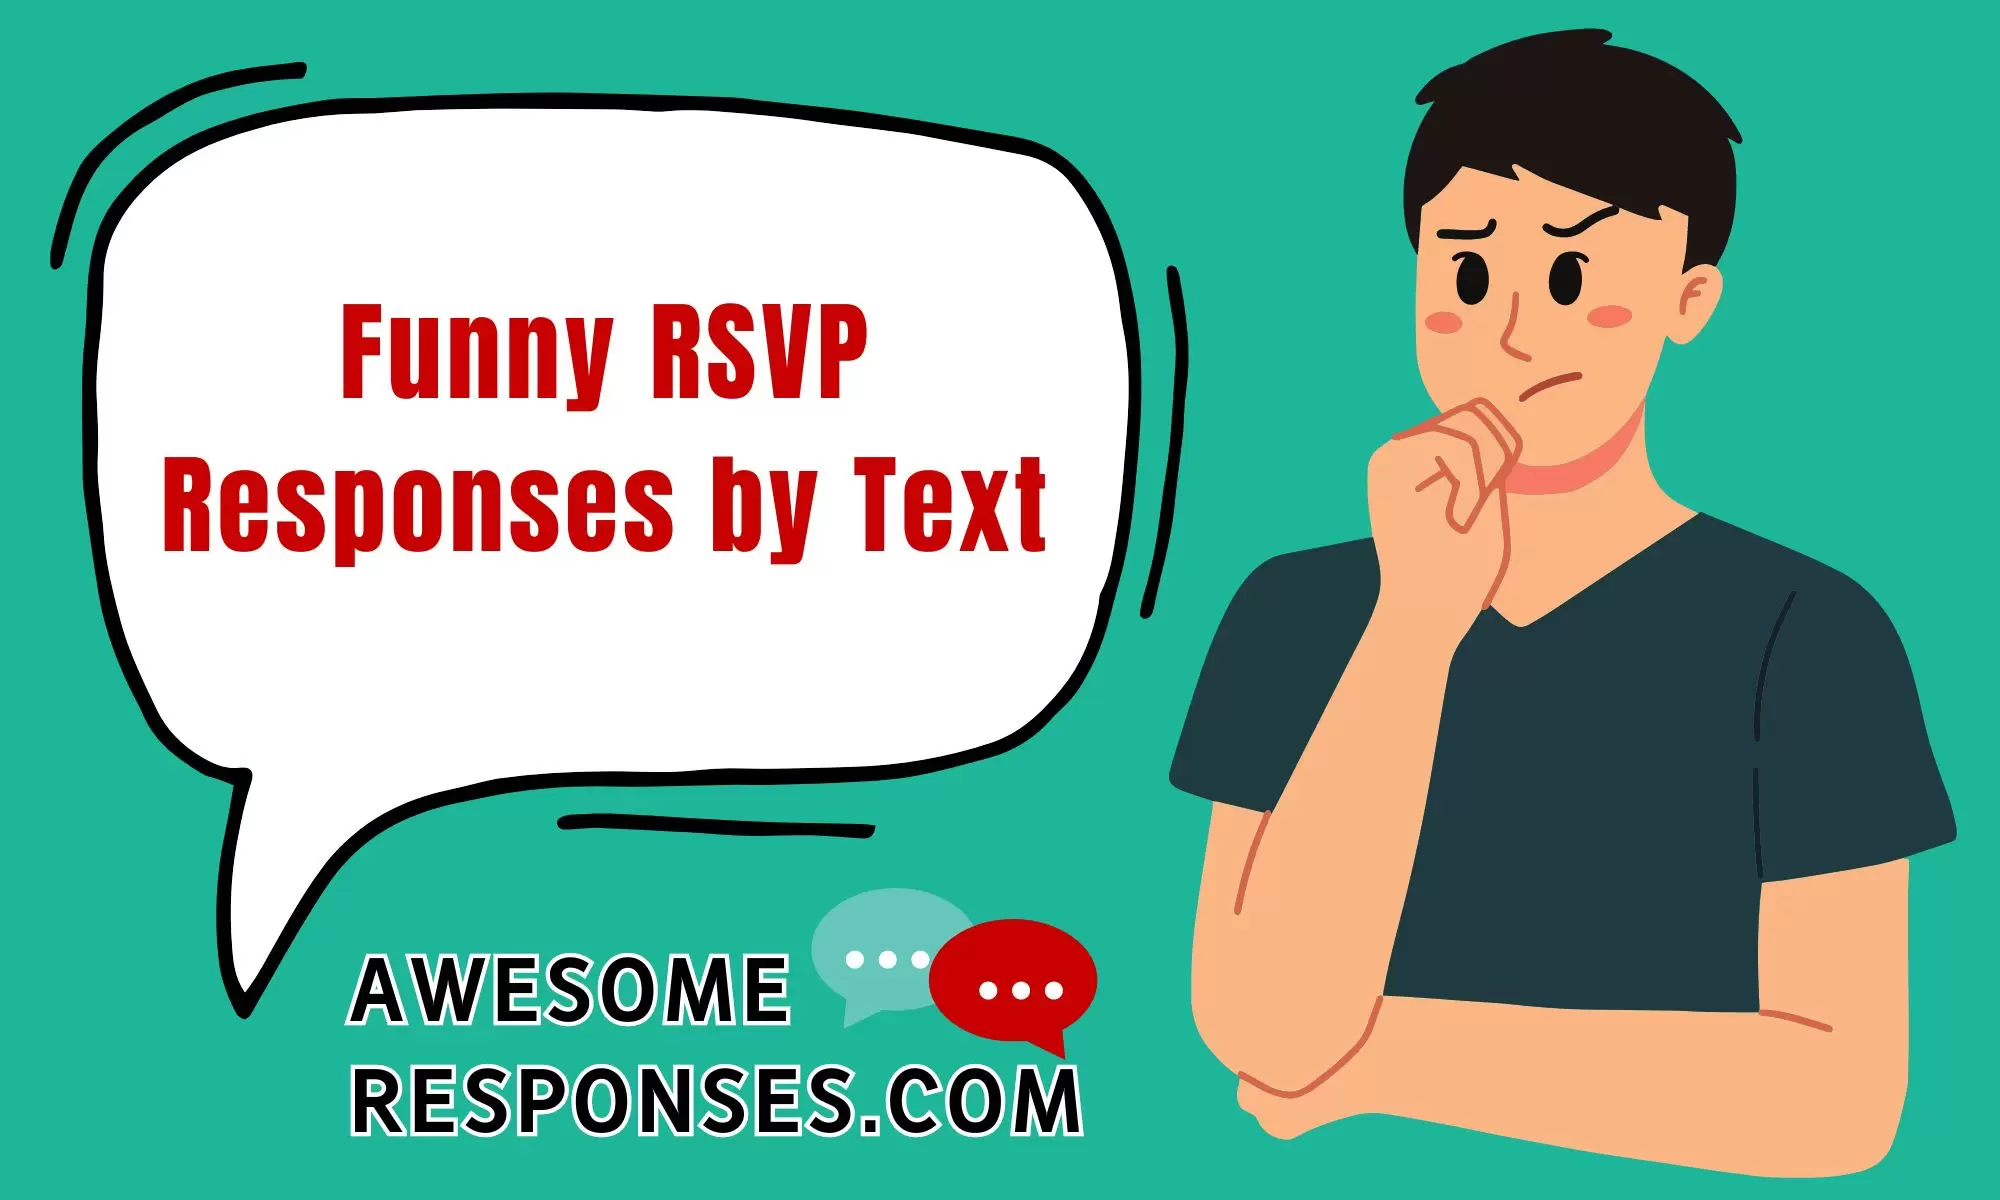 Funny RSVP Responses by Text